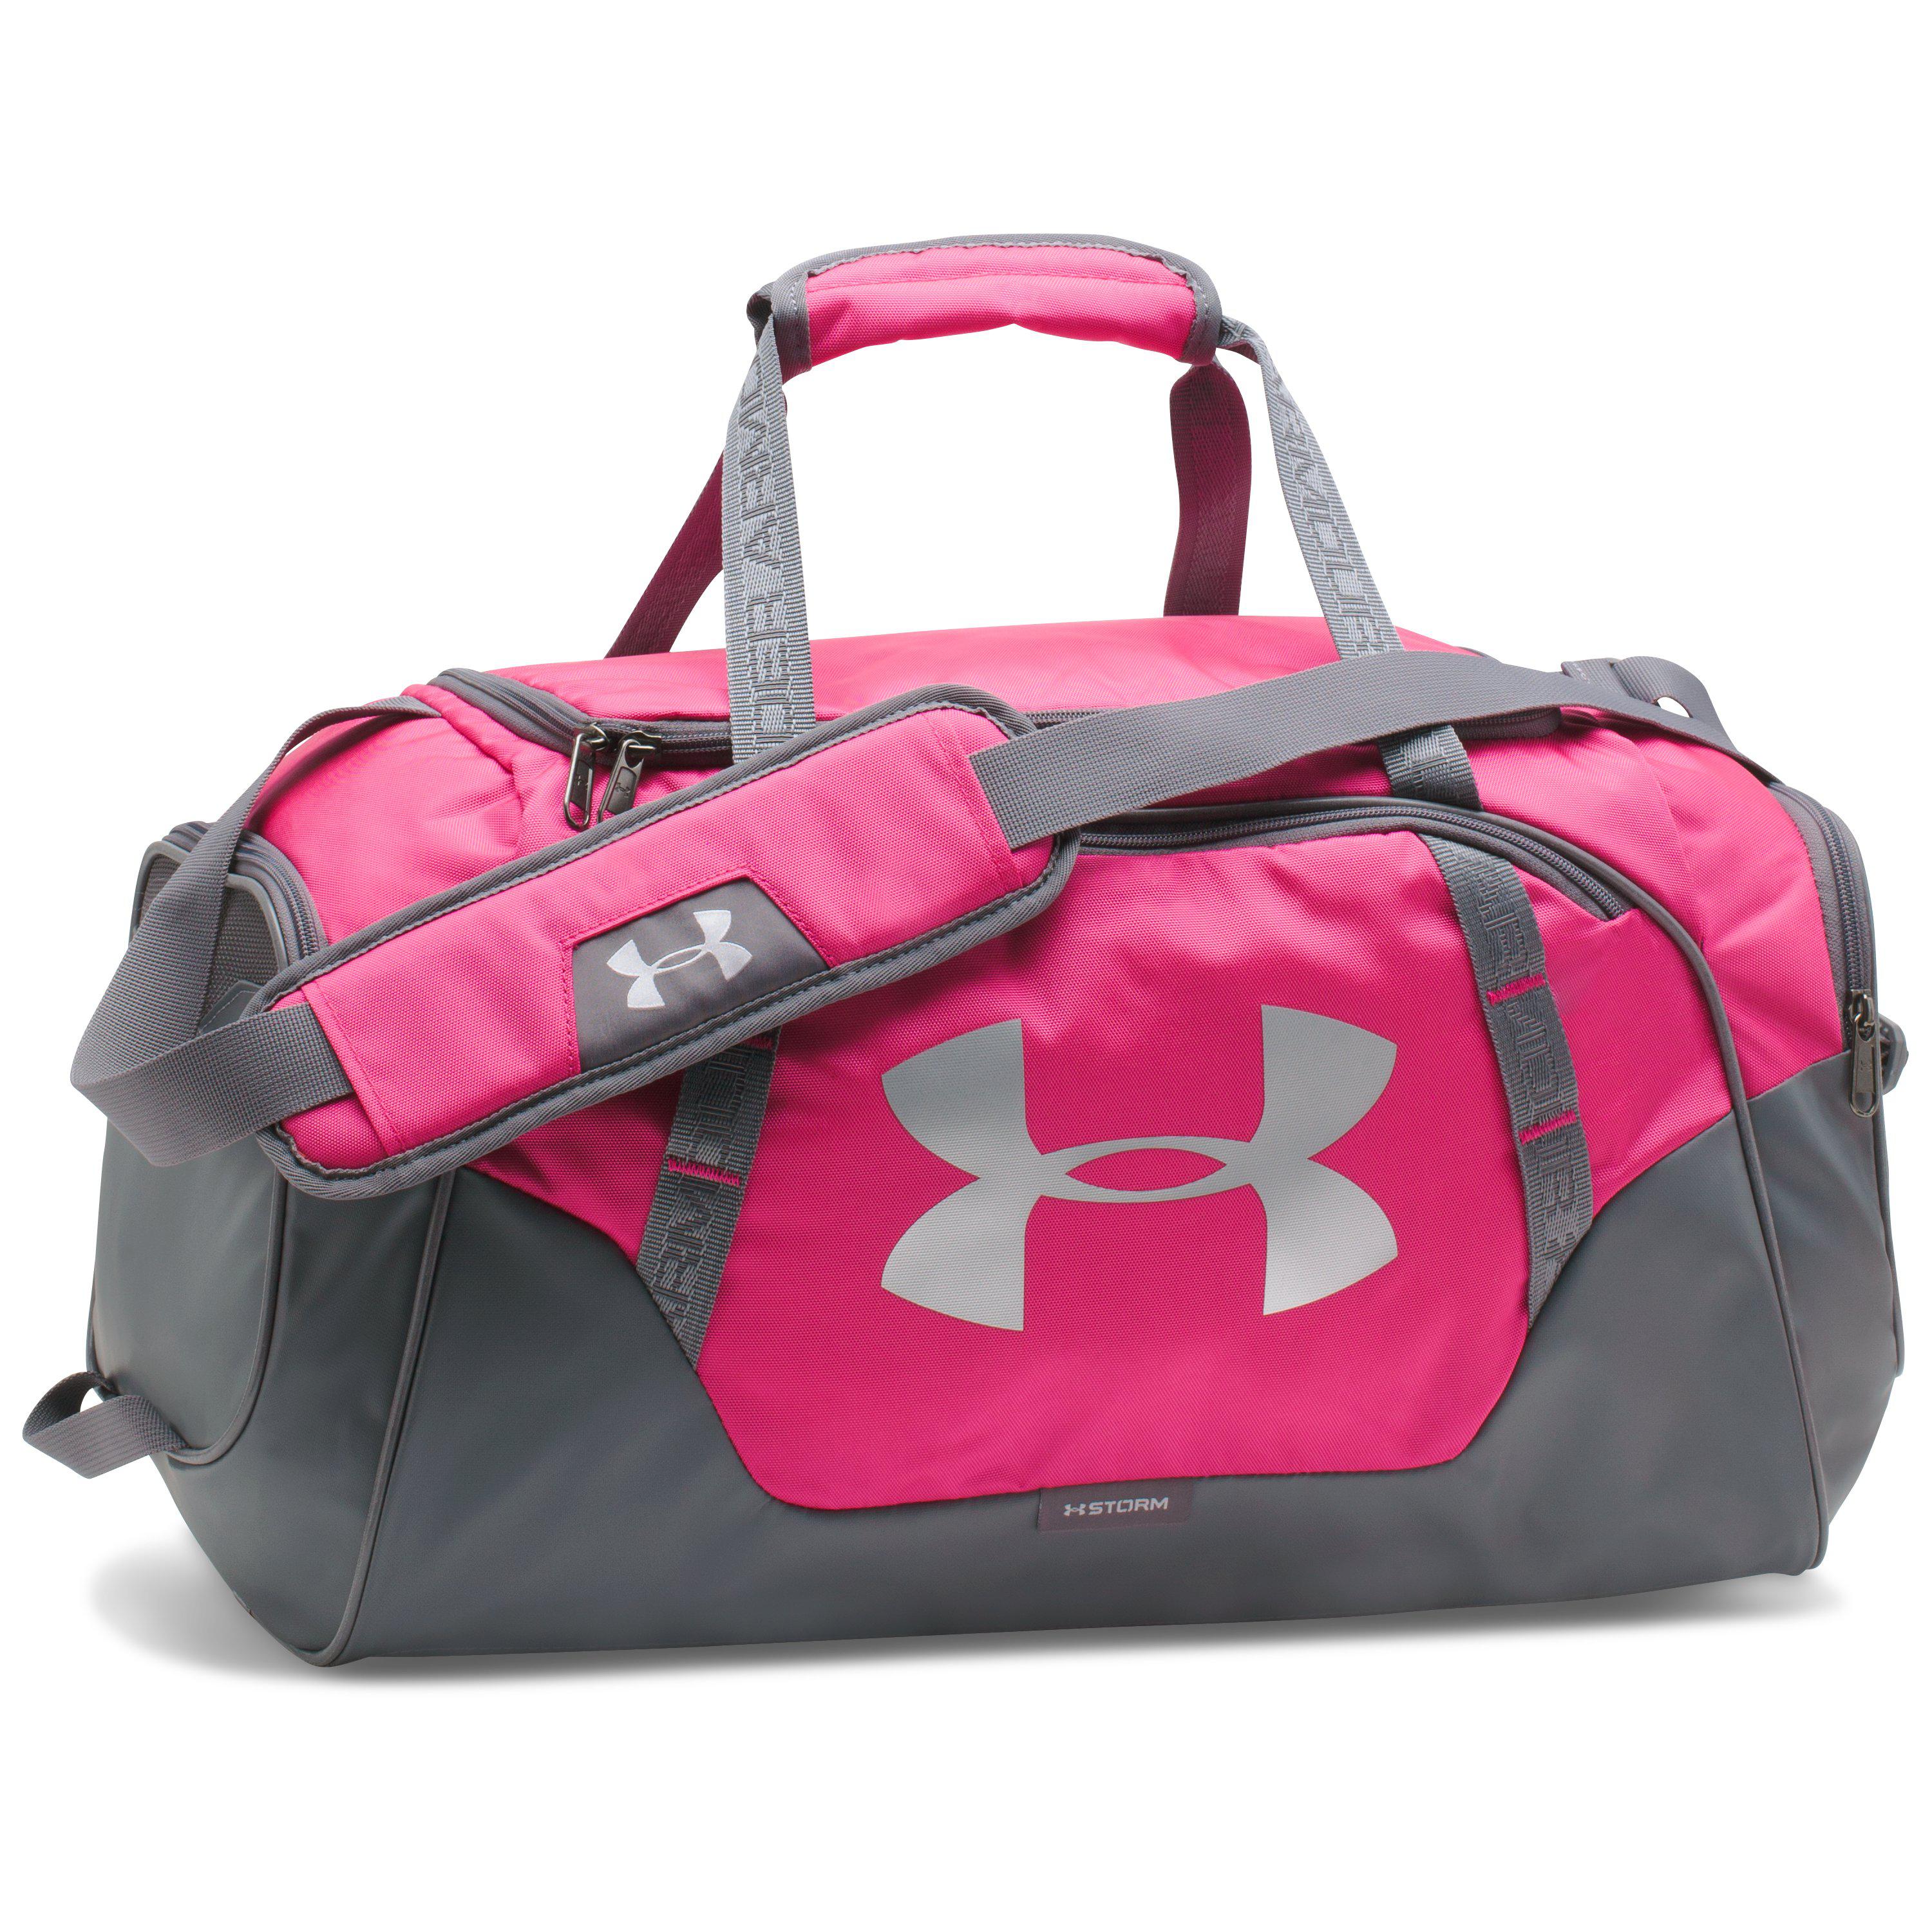 Duffle Bag in Pink for Men - Lyst